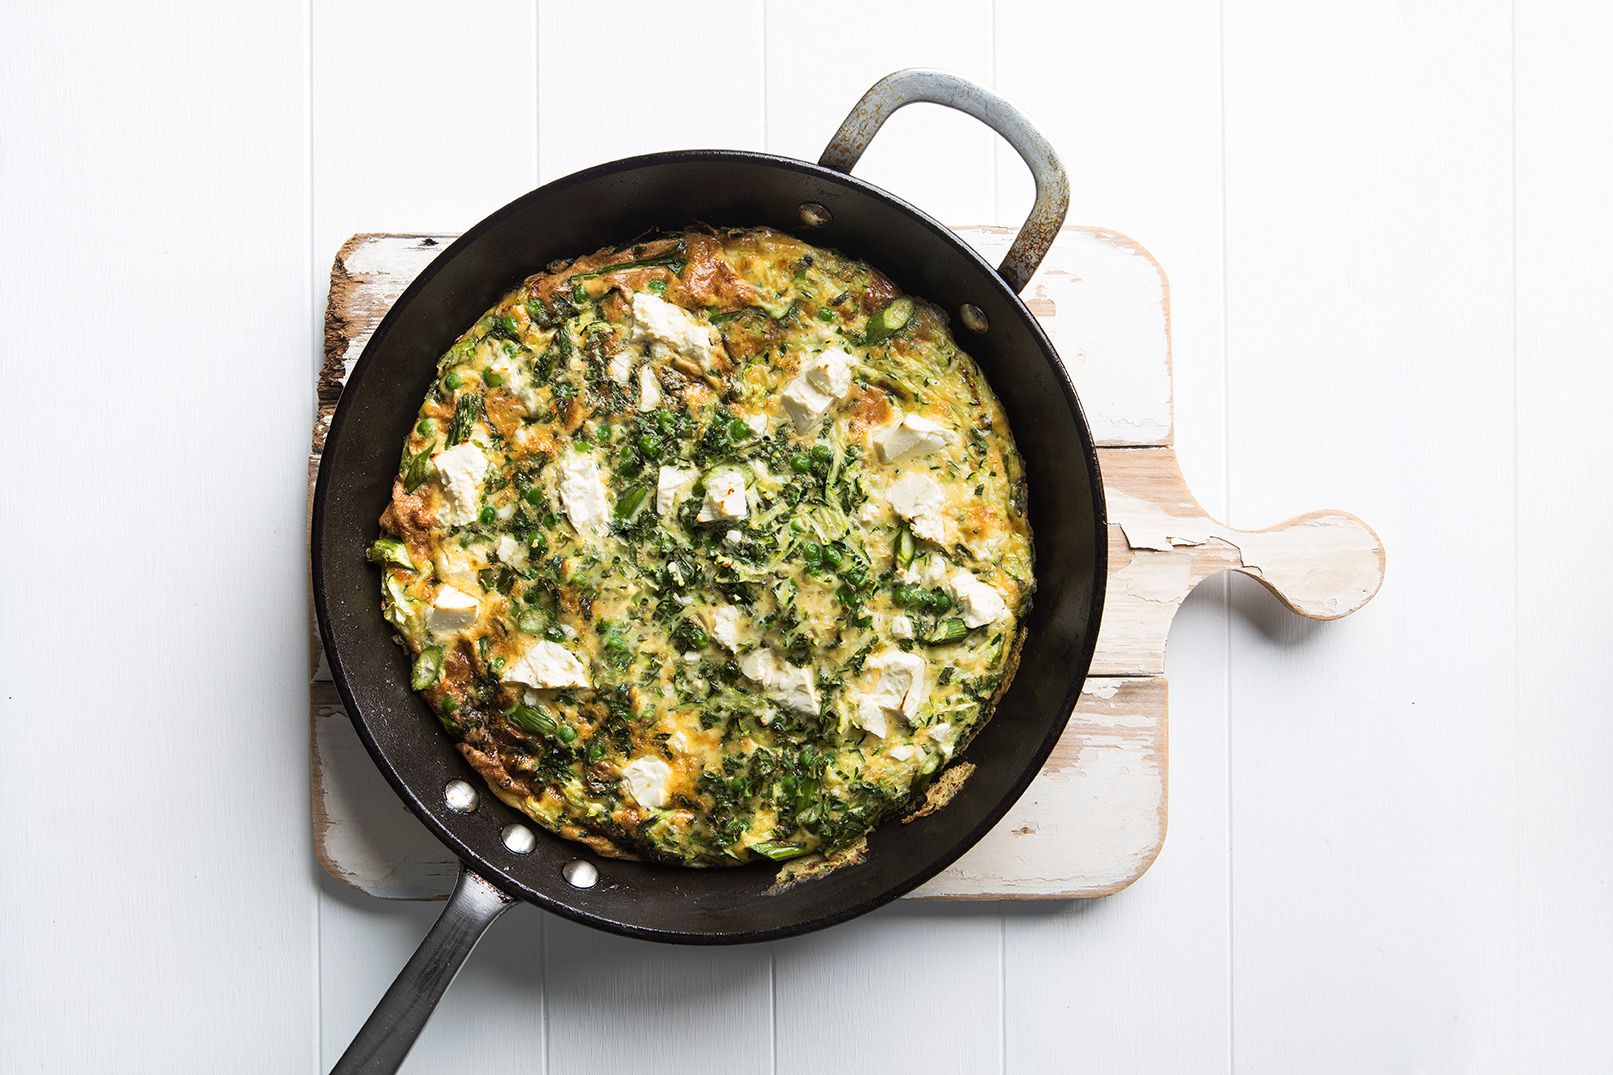 Image of a green frittata recipe cooked and served in a large round frypan sitting on a wooden cutting board